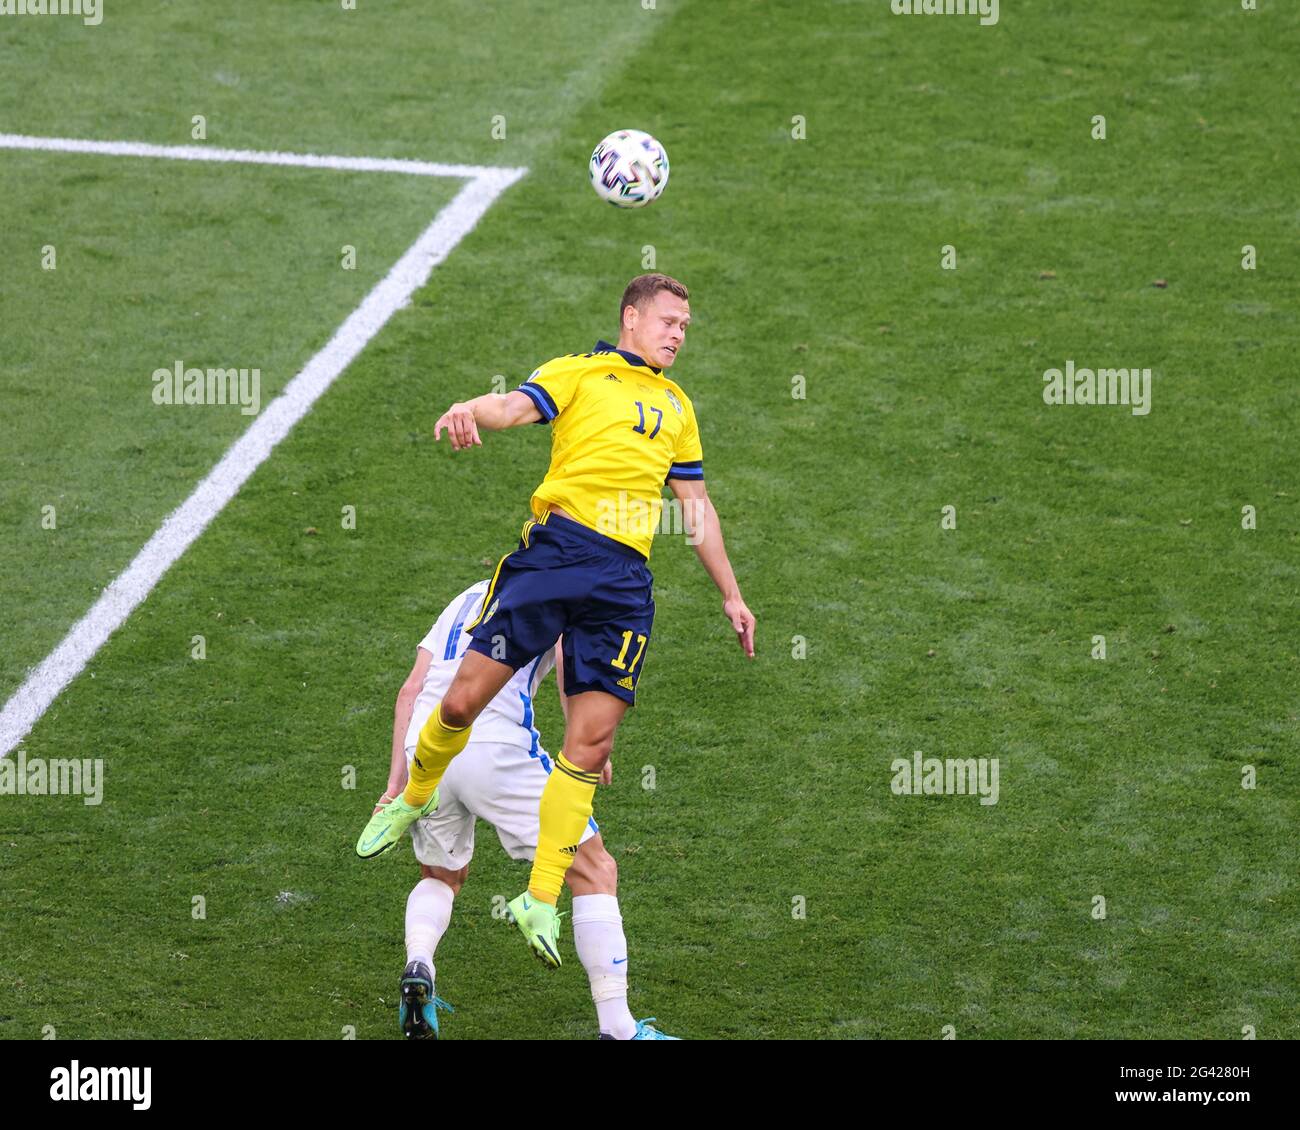 Saint Petersburg, Russia. 18th June, 2021. Viktor Claesson (17) of Sweden in action during the European championship EURO 2020 between Sweden and Slovakia at Gazprom Arena. (Final Score; Sweden 1:0 Slovakia). (Photo by Maksim Konstantinov/SOPA Image/Sipa USA) Credit: Sipa USA/Alamy Live News Stock Photo